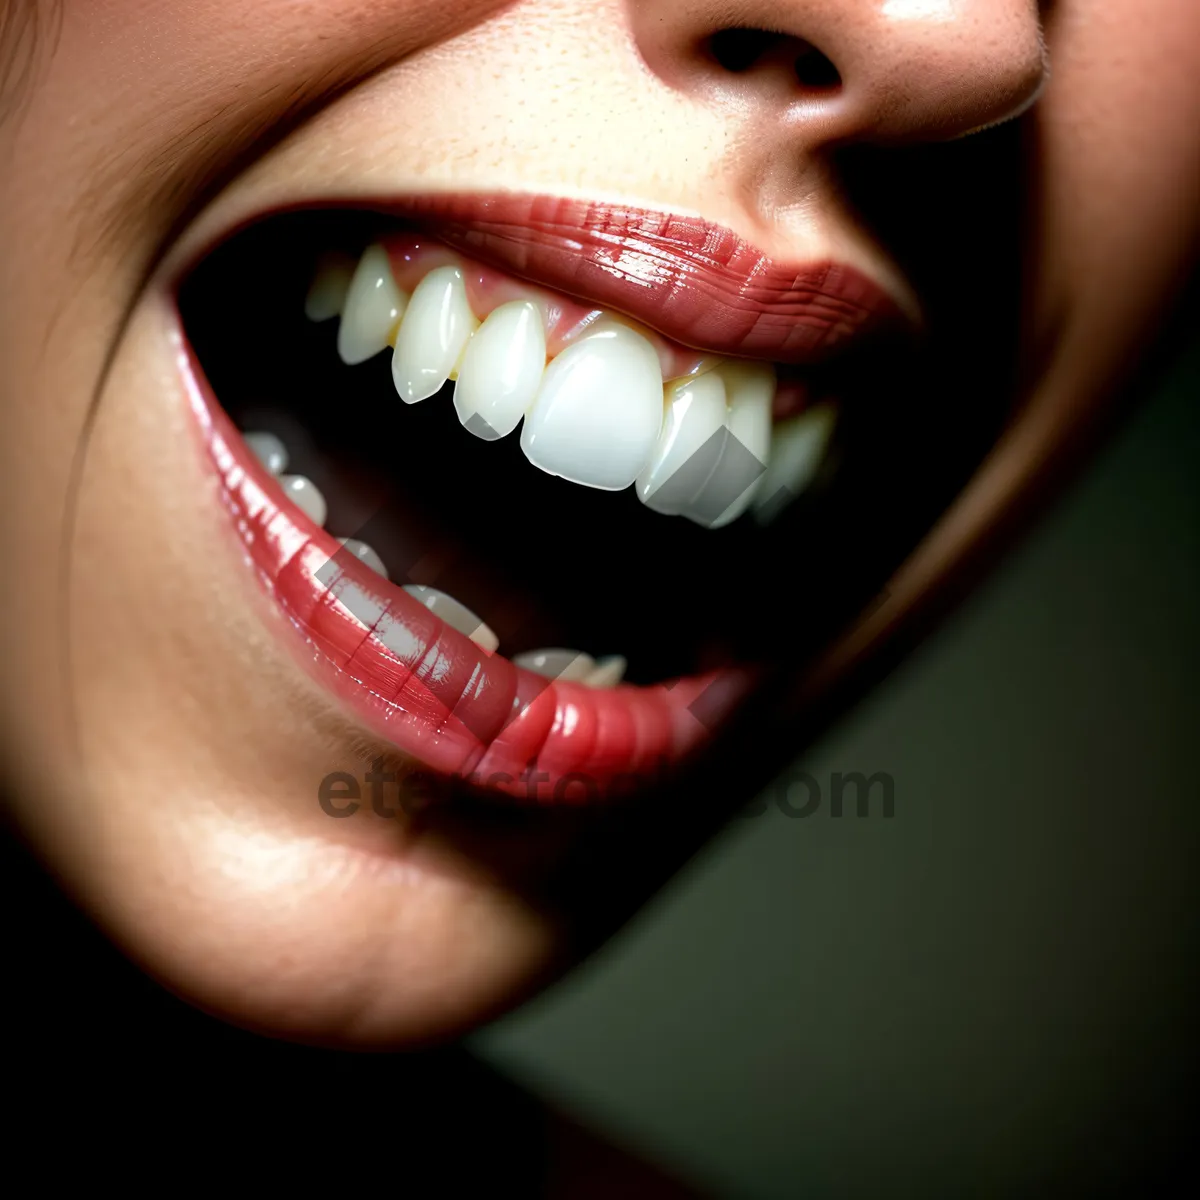 Picture of Stunning close-up of alluring lipstick-enhanced smile.